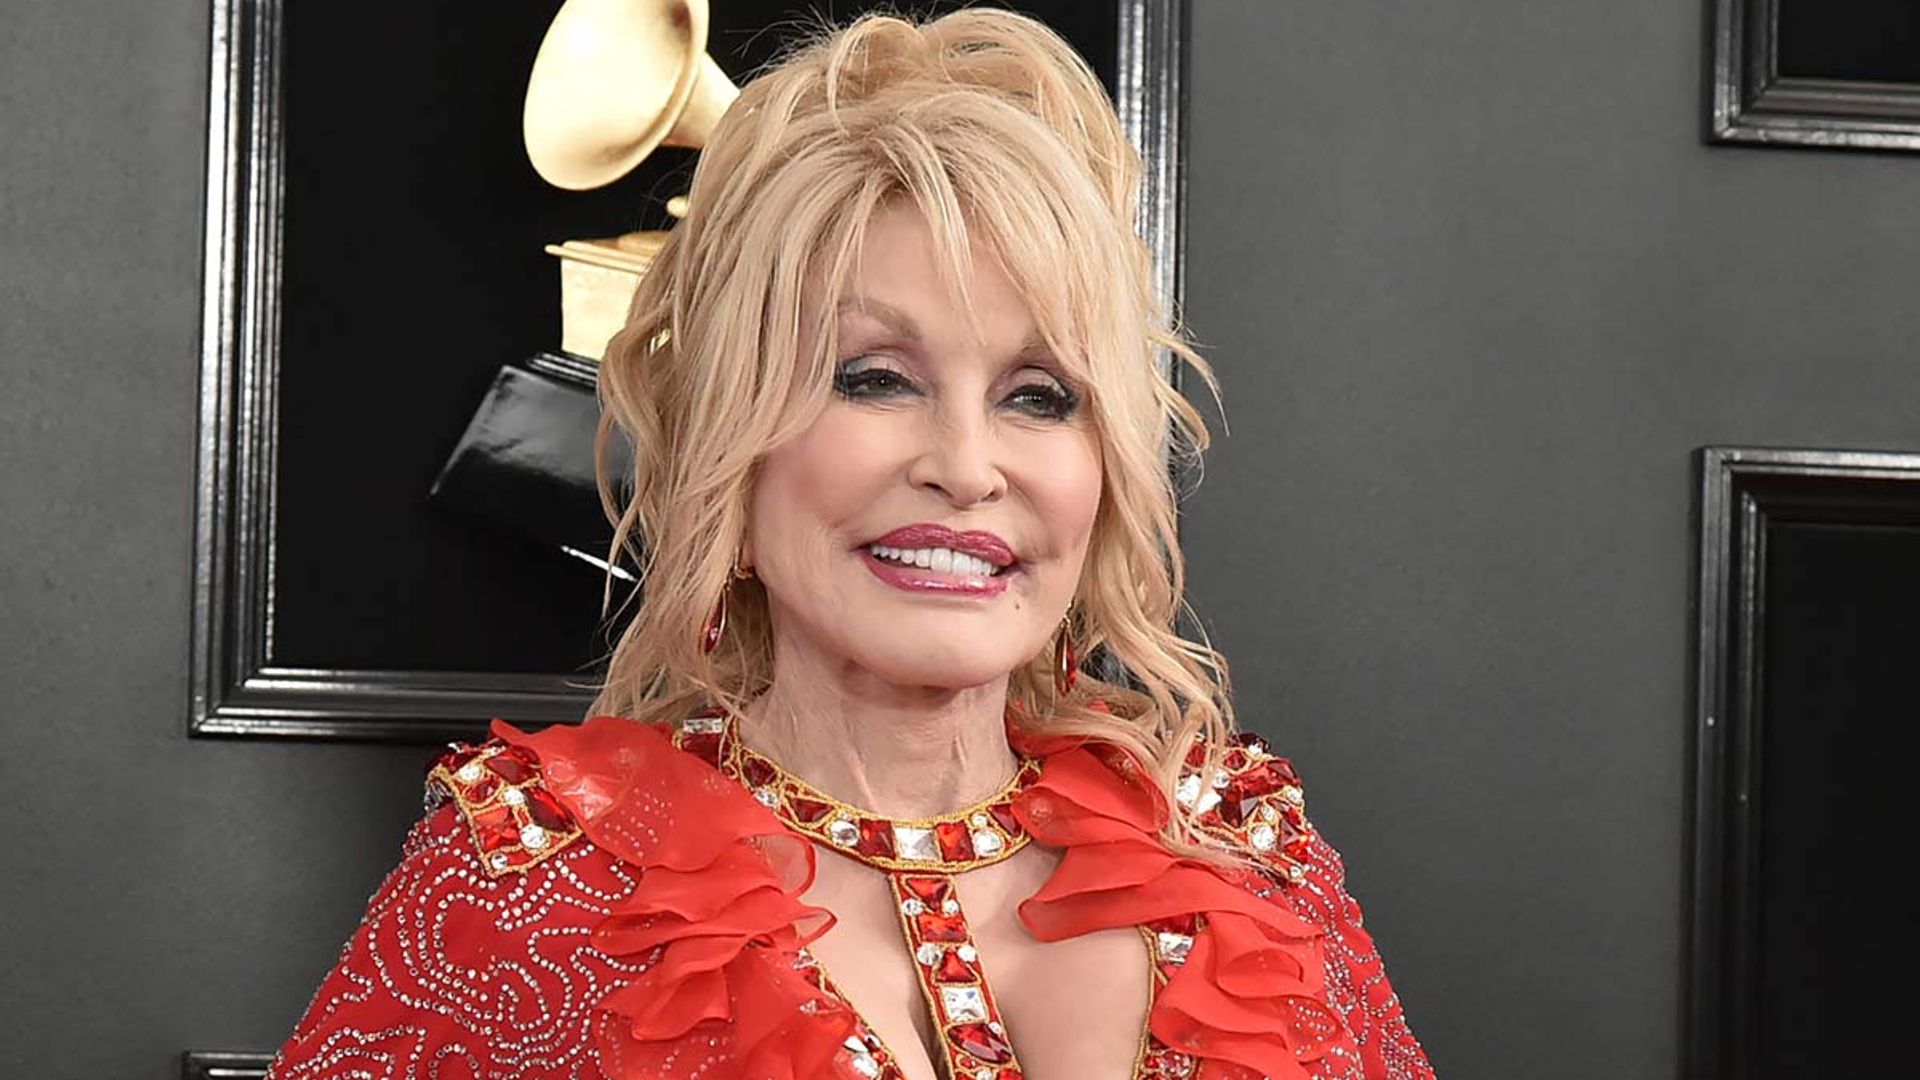 Dolly Parton reveals surprising reason she sleeps in her makeup